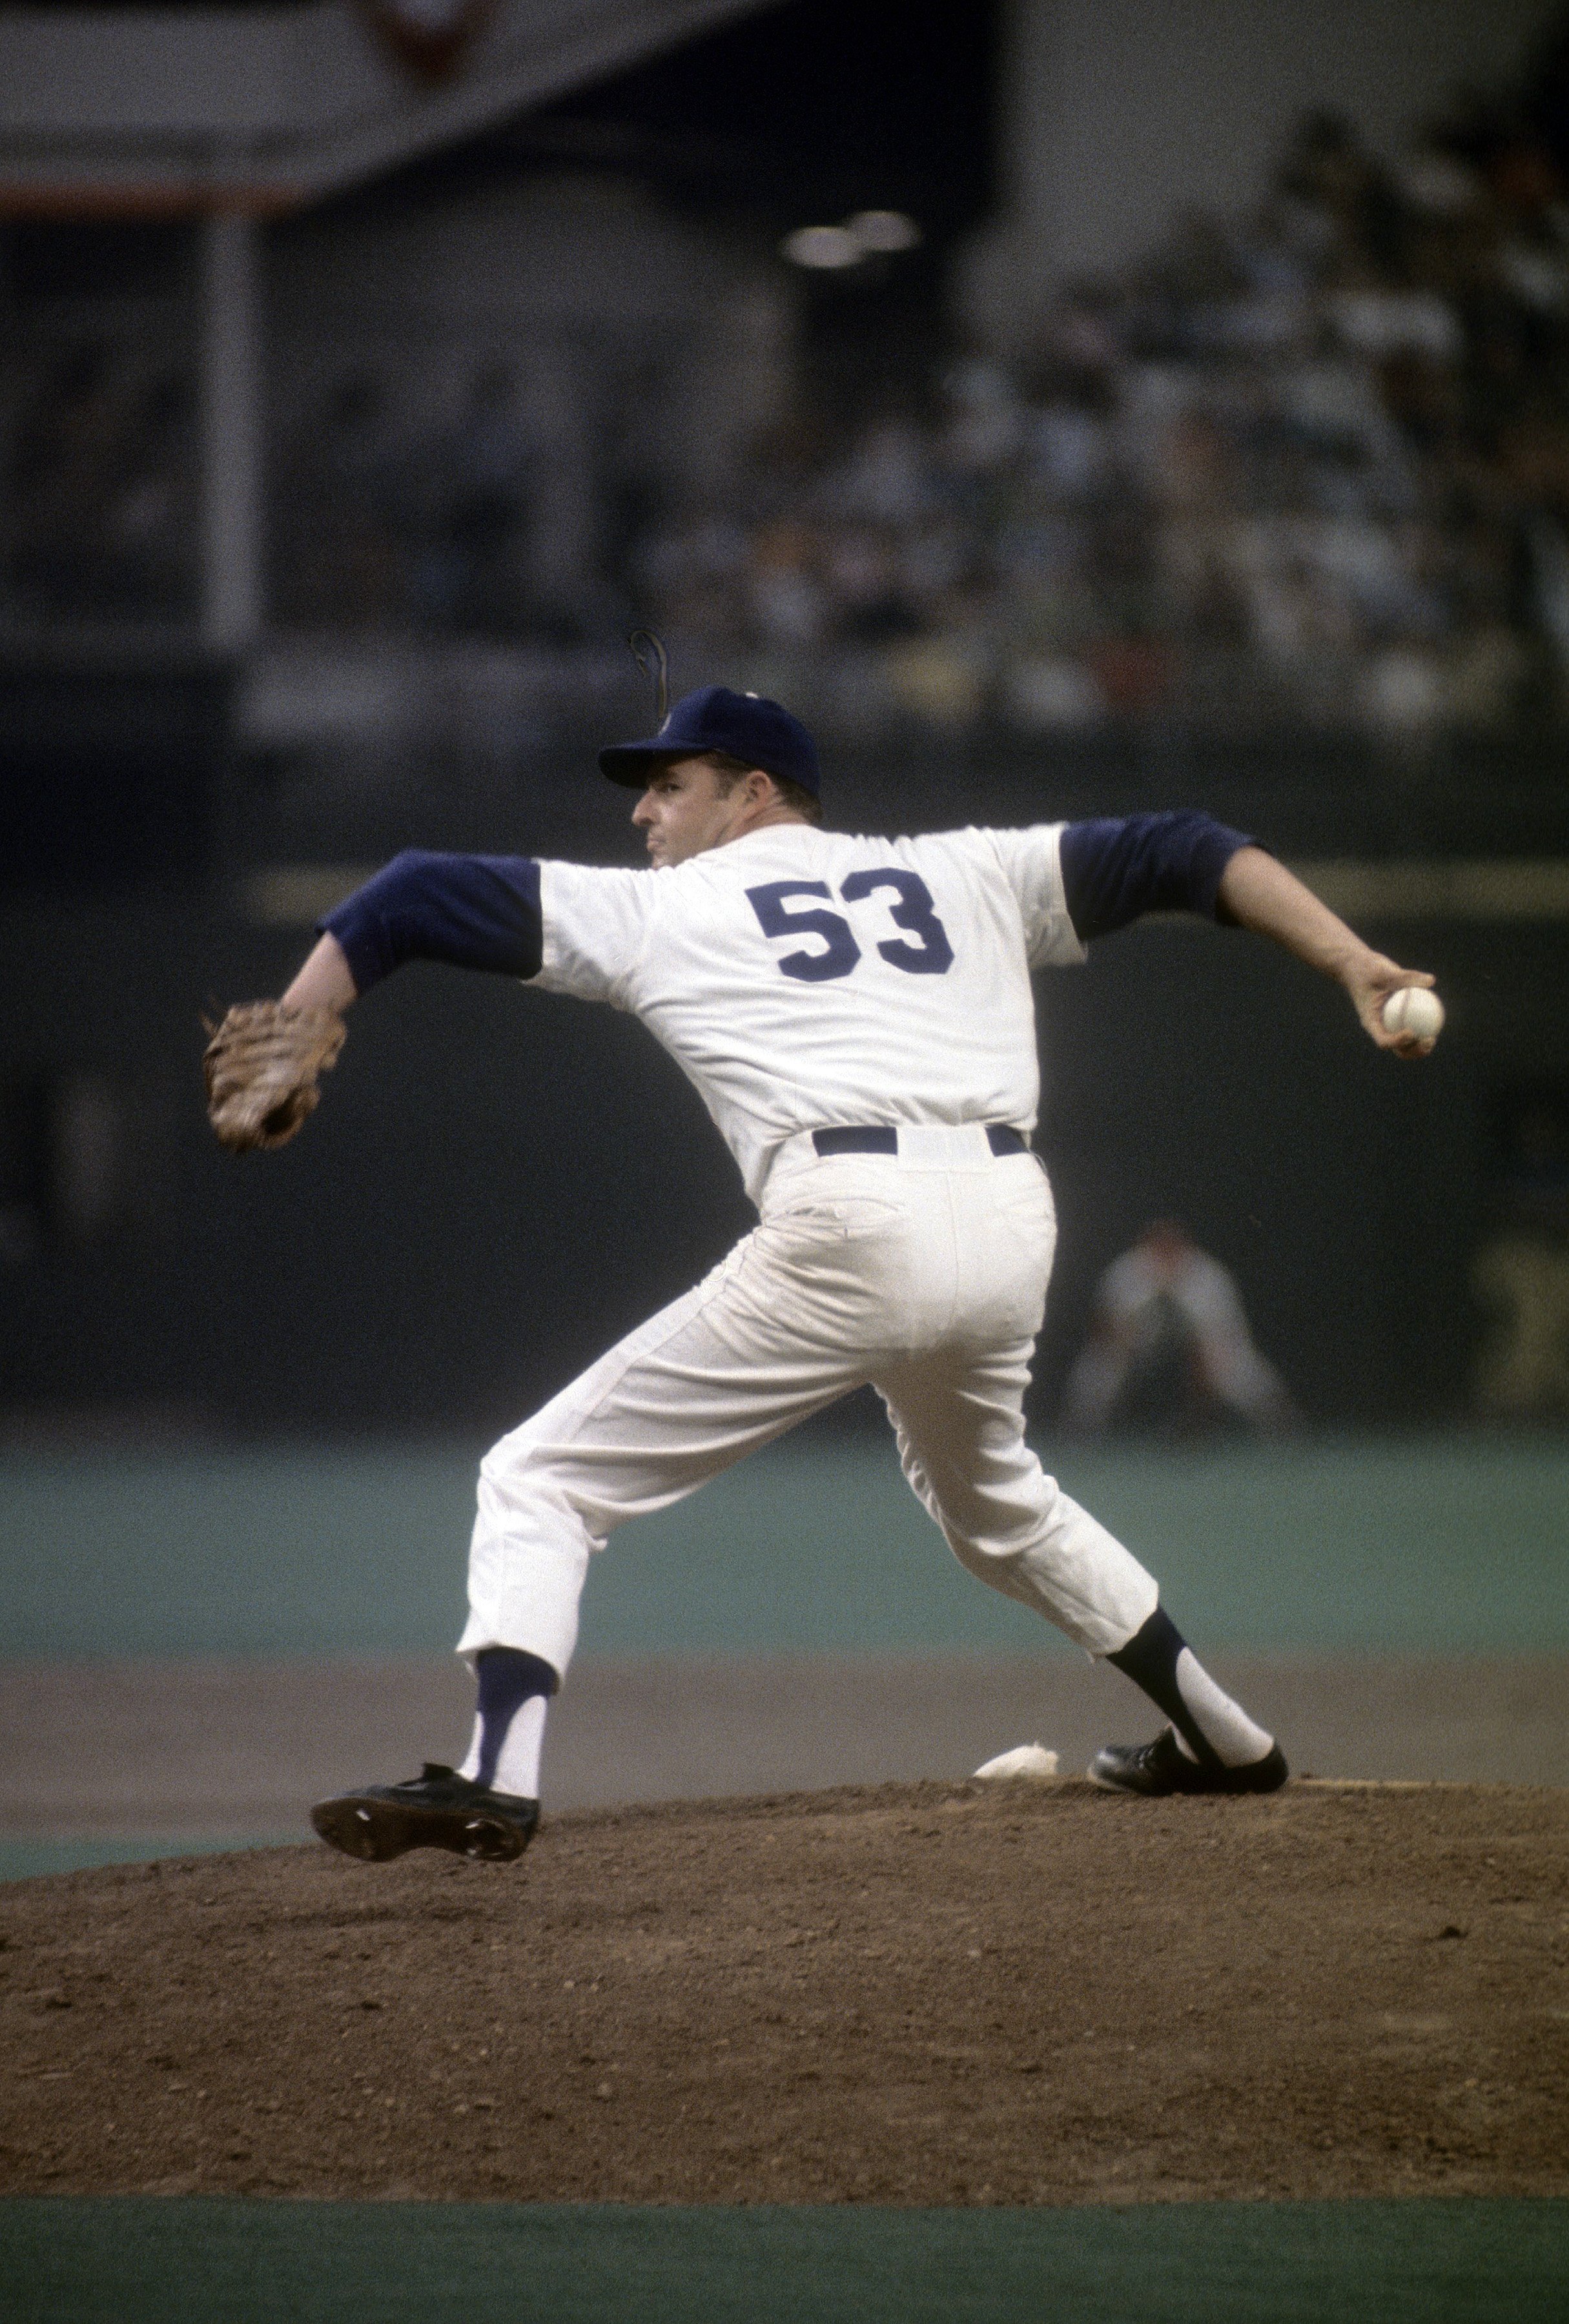 Don Drysdale won his 200th career game on June 26, 1968 as the Dodgers beat the Giants.